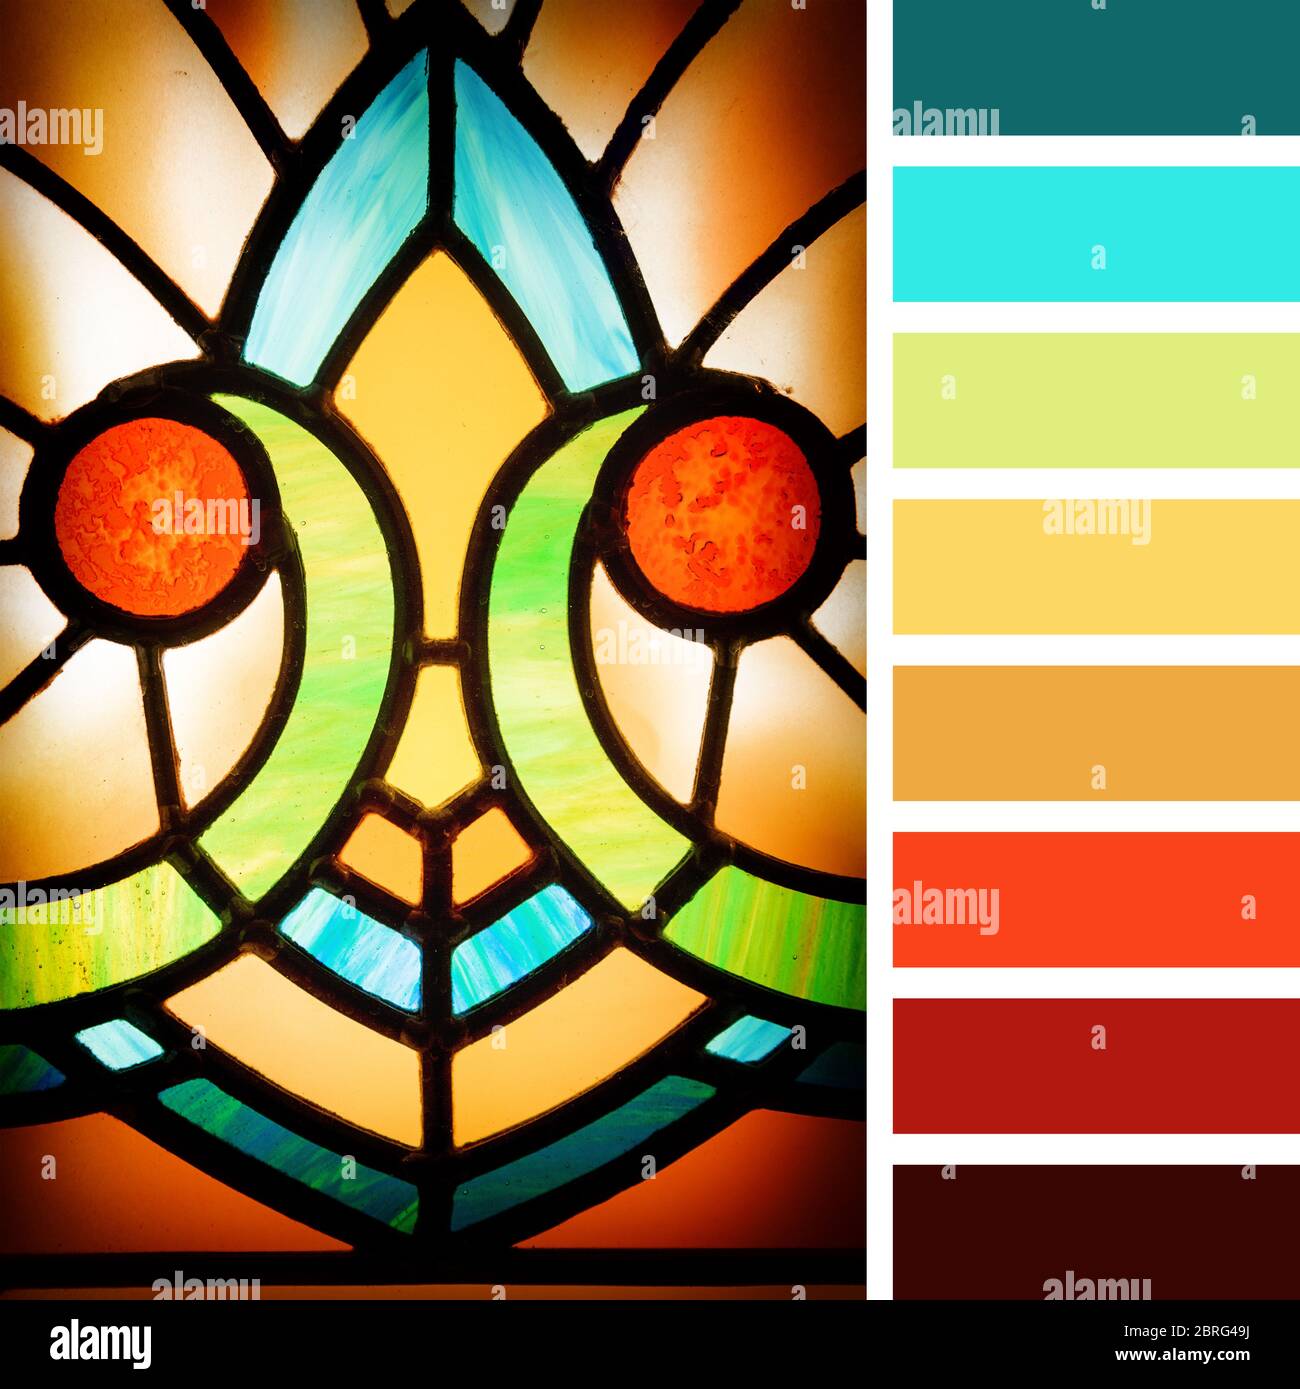 https://c8.alamy.com/comp/2BRG49J/art-deco-styles-stained-glass-detail-in-a-colour-palette-with-complimentary-colour-swatches-2BRG49J.jpg